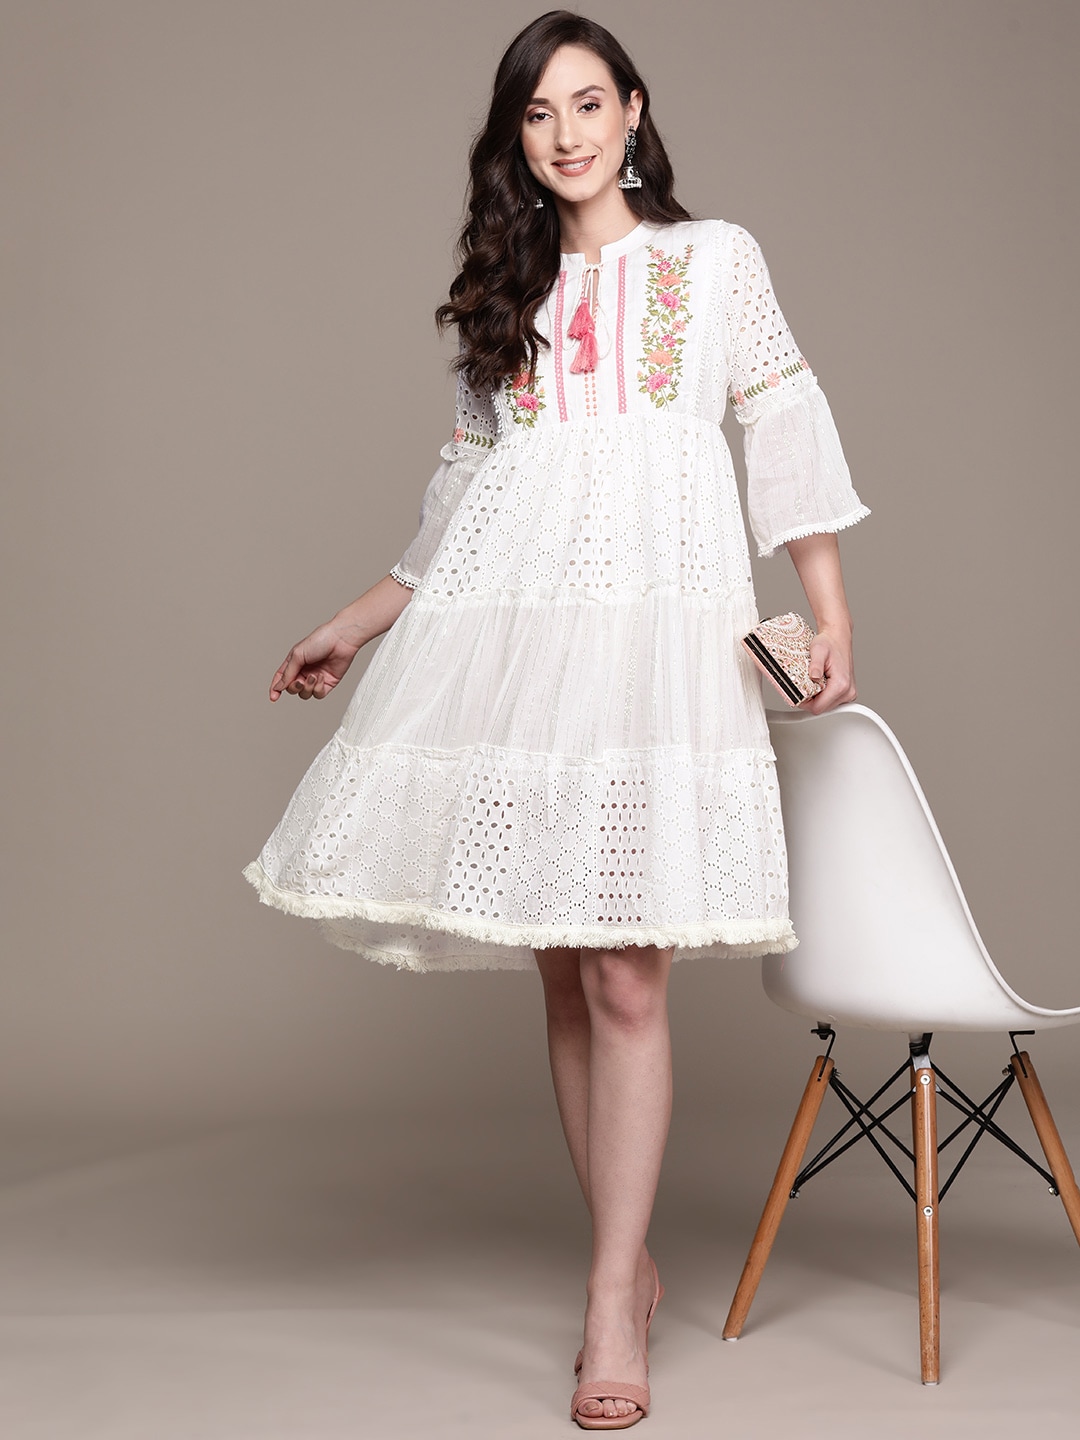 Ishin White Floral Embroidered A-Line Dress Price in India